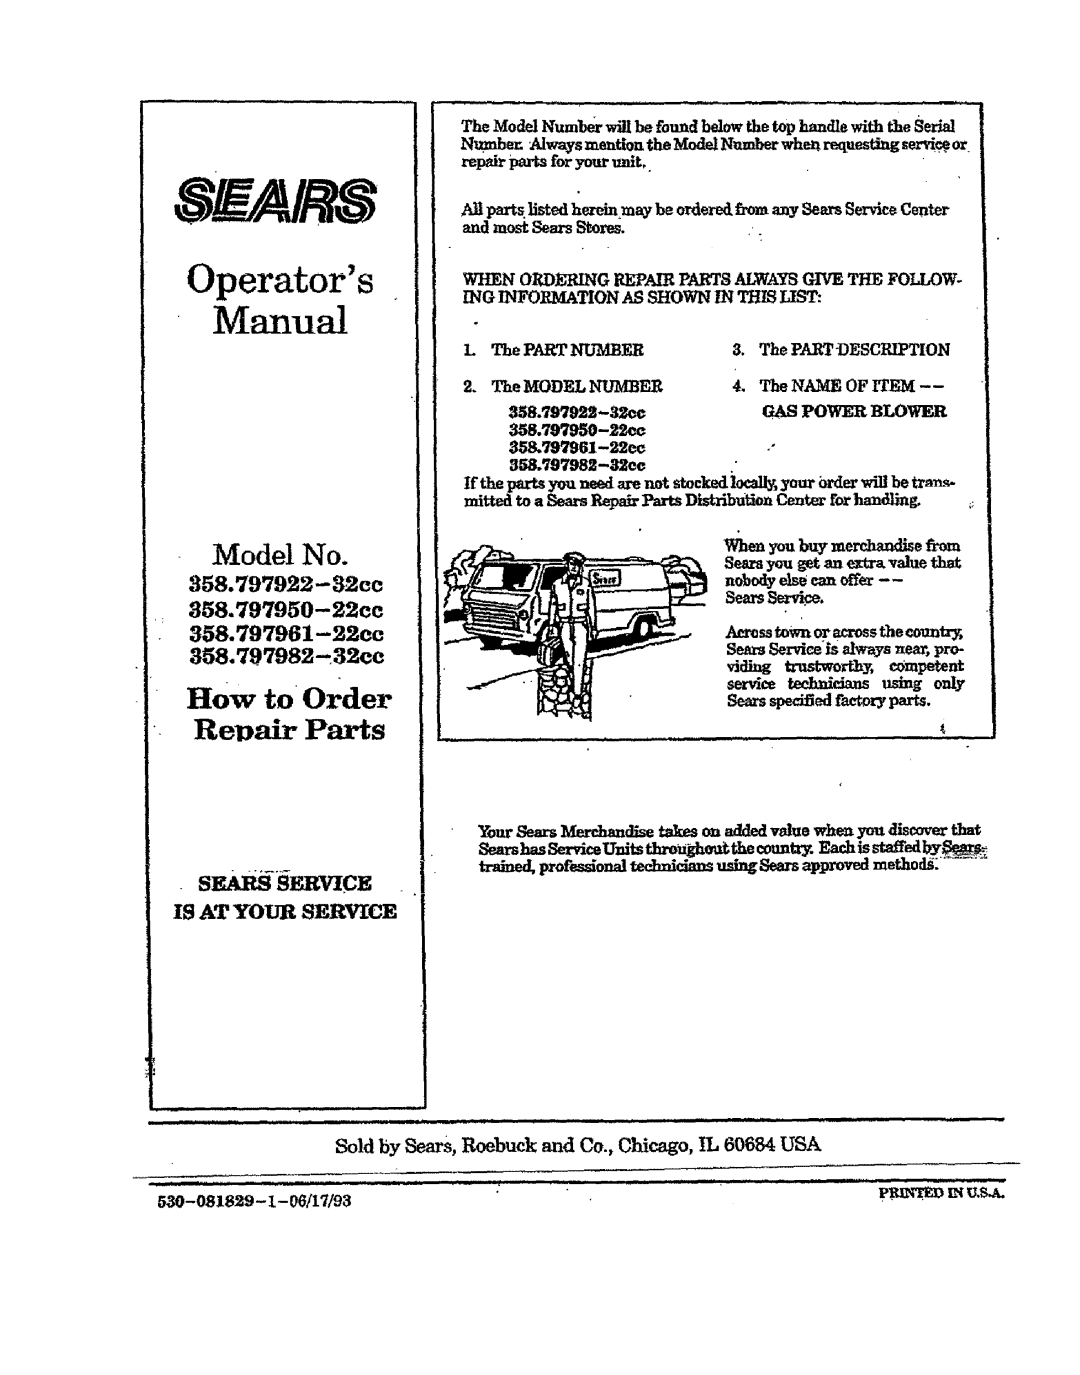 Craftsman 358.797921 Operators Manual, Revair Parts, Model No, HOW to Order, Sf Rs-Sfwce, 358.797982--32cc, SearsSerd 